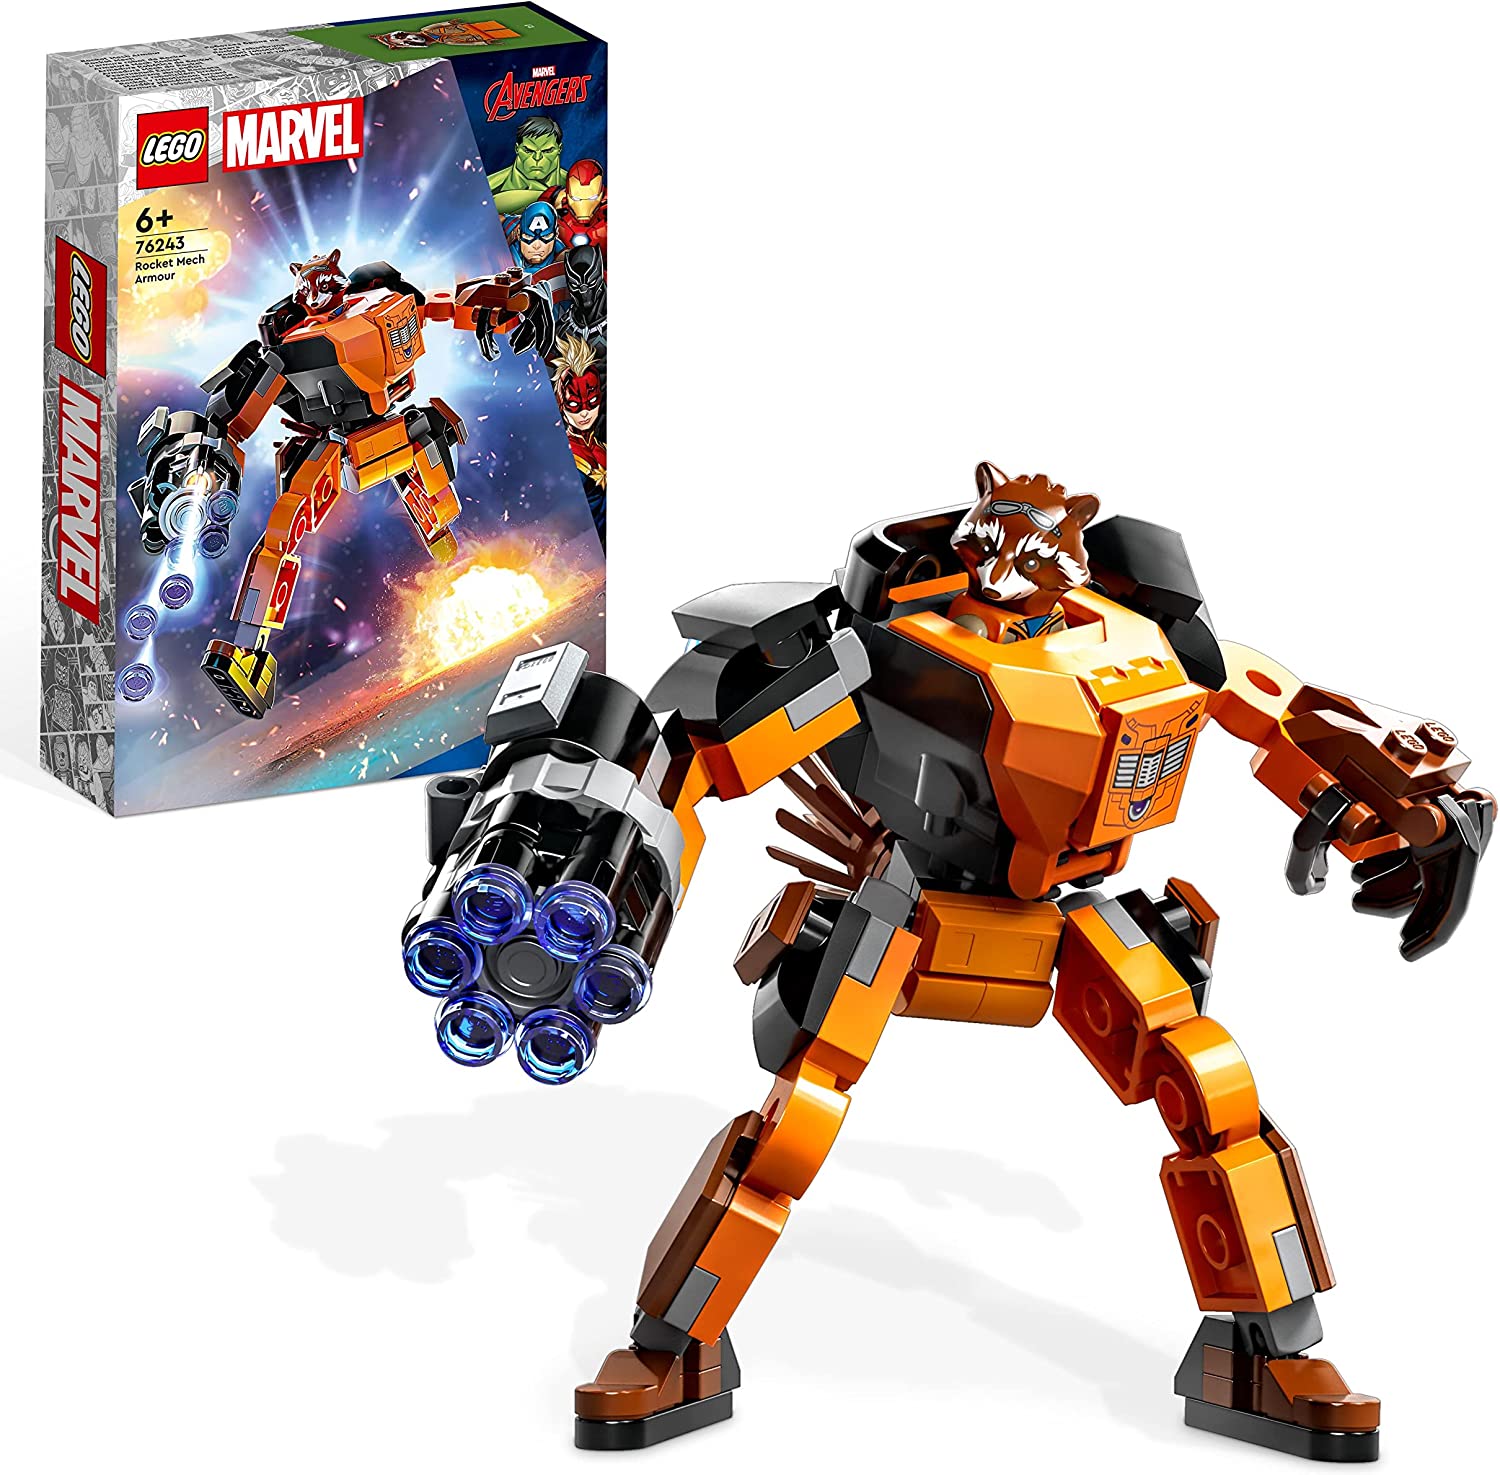 LEGO 76243 Marvel Rocket Mech Avengers Toy Action Figure from Guardians of The Galaxy with Collectable Figures for Children from 6 Years